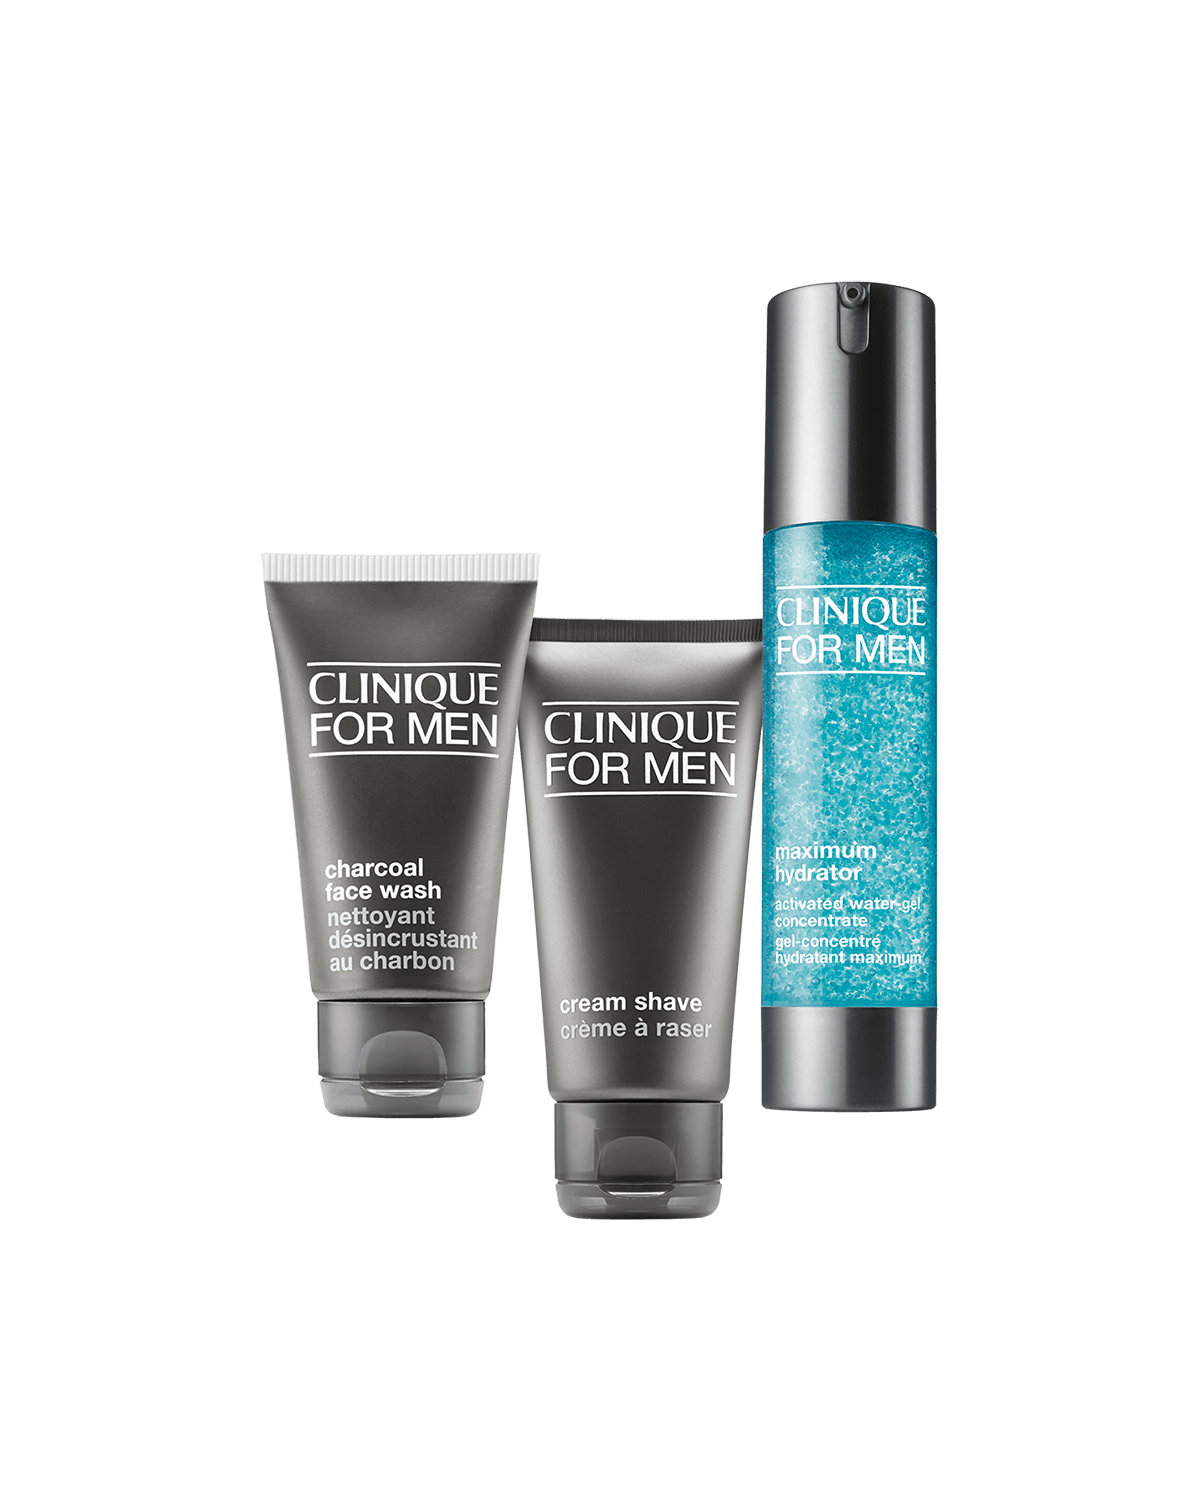  Clinique For Men™ Value Kit – Daily Intense Hydration